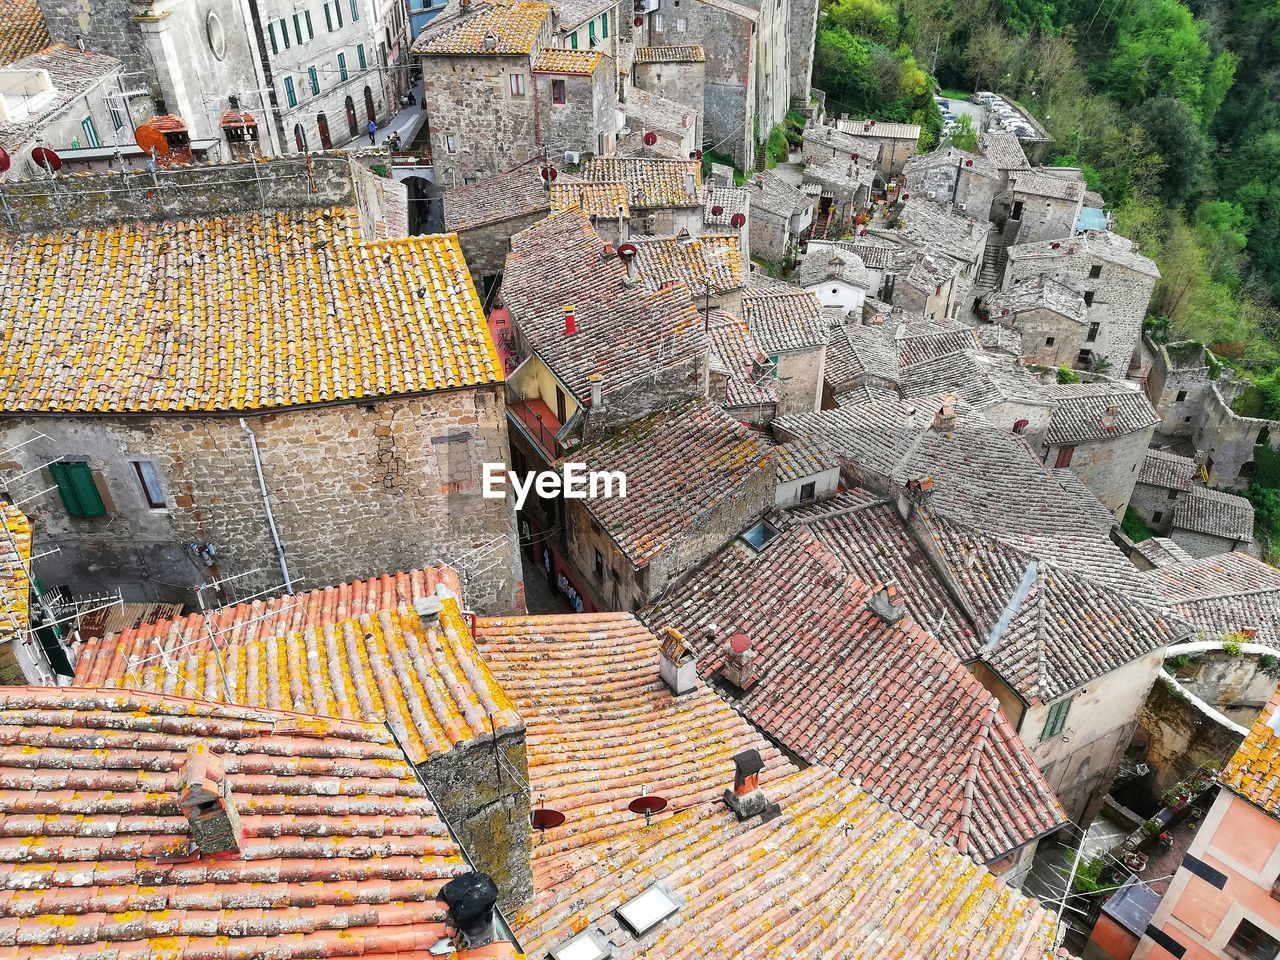 View of the roofs of sorano in italy